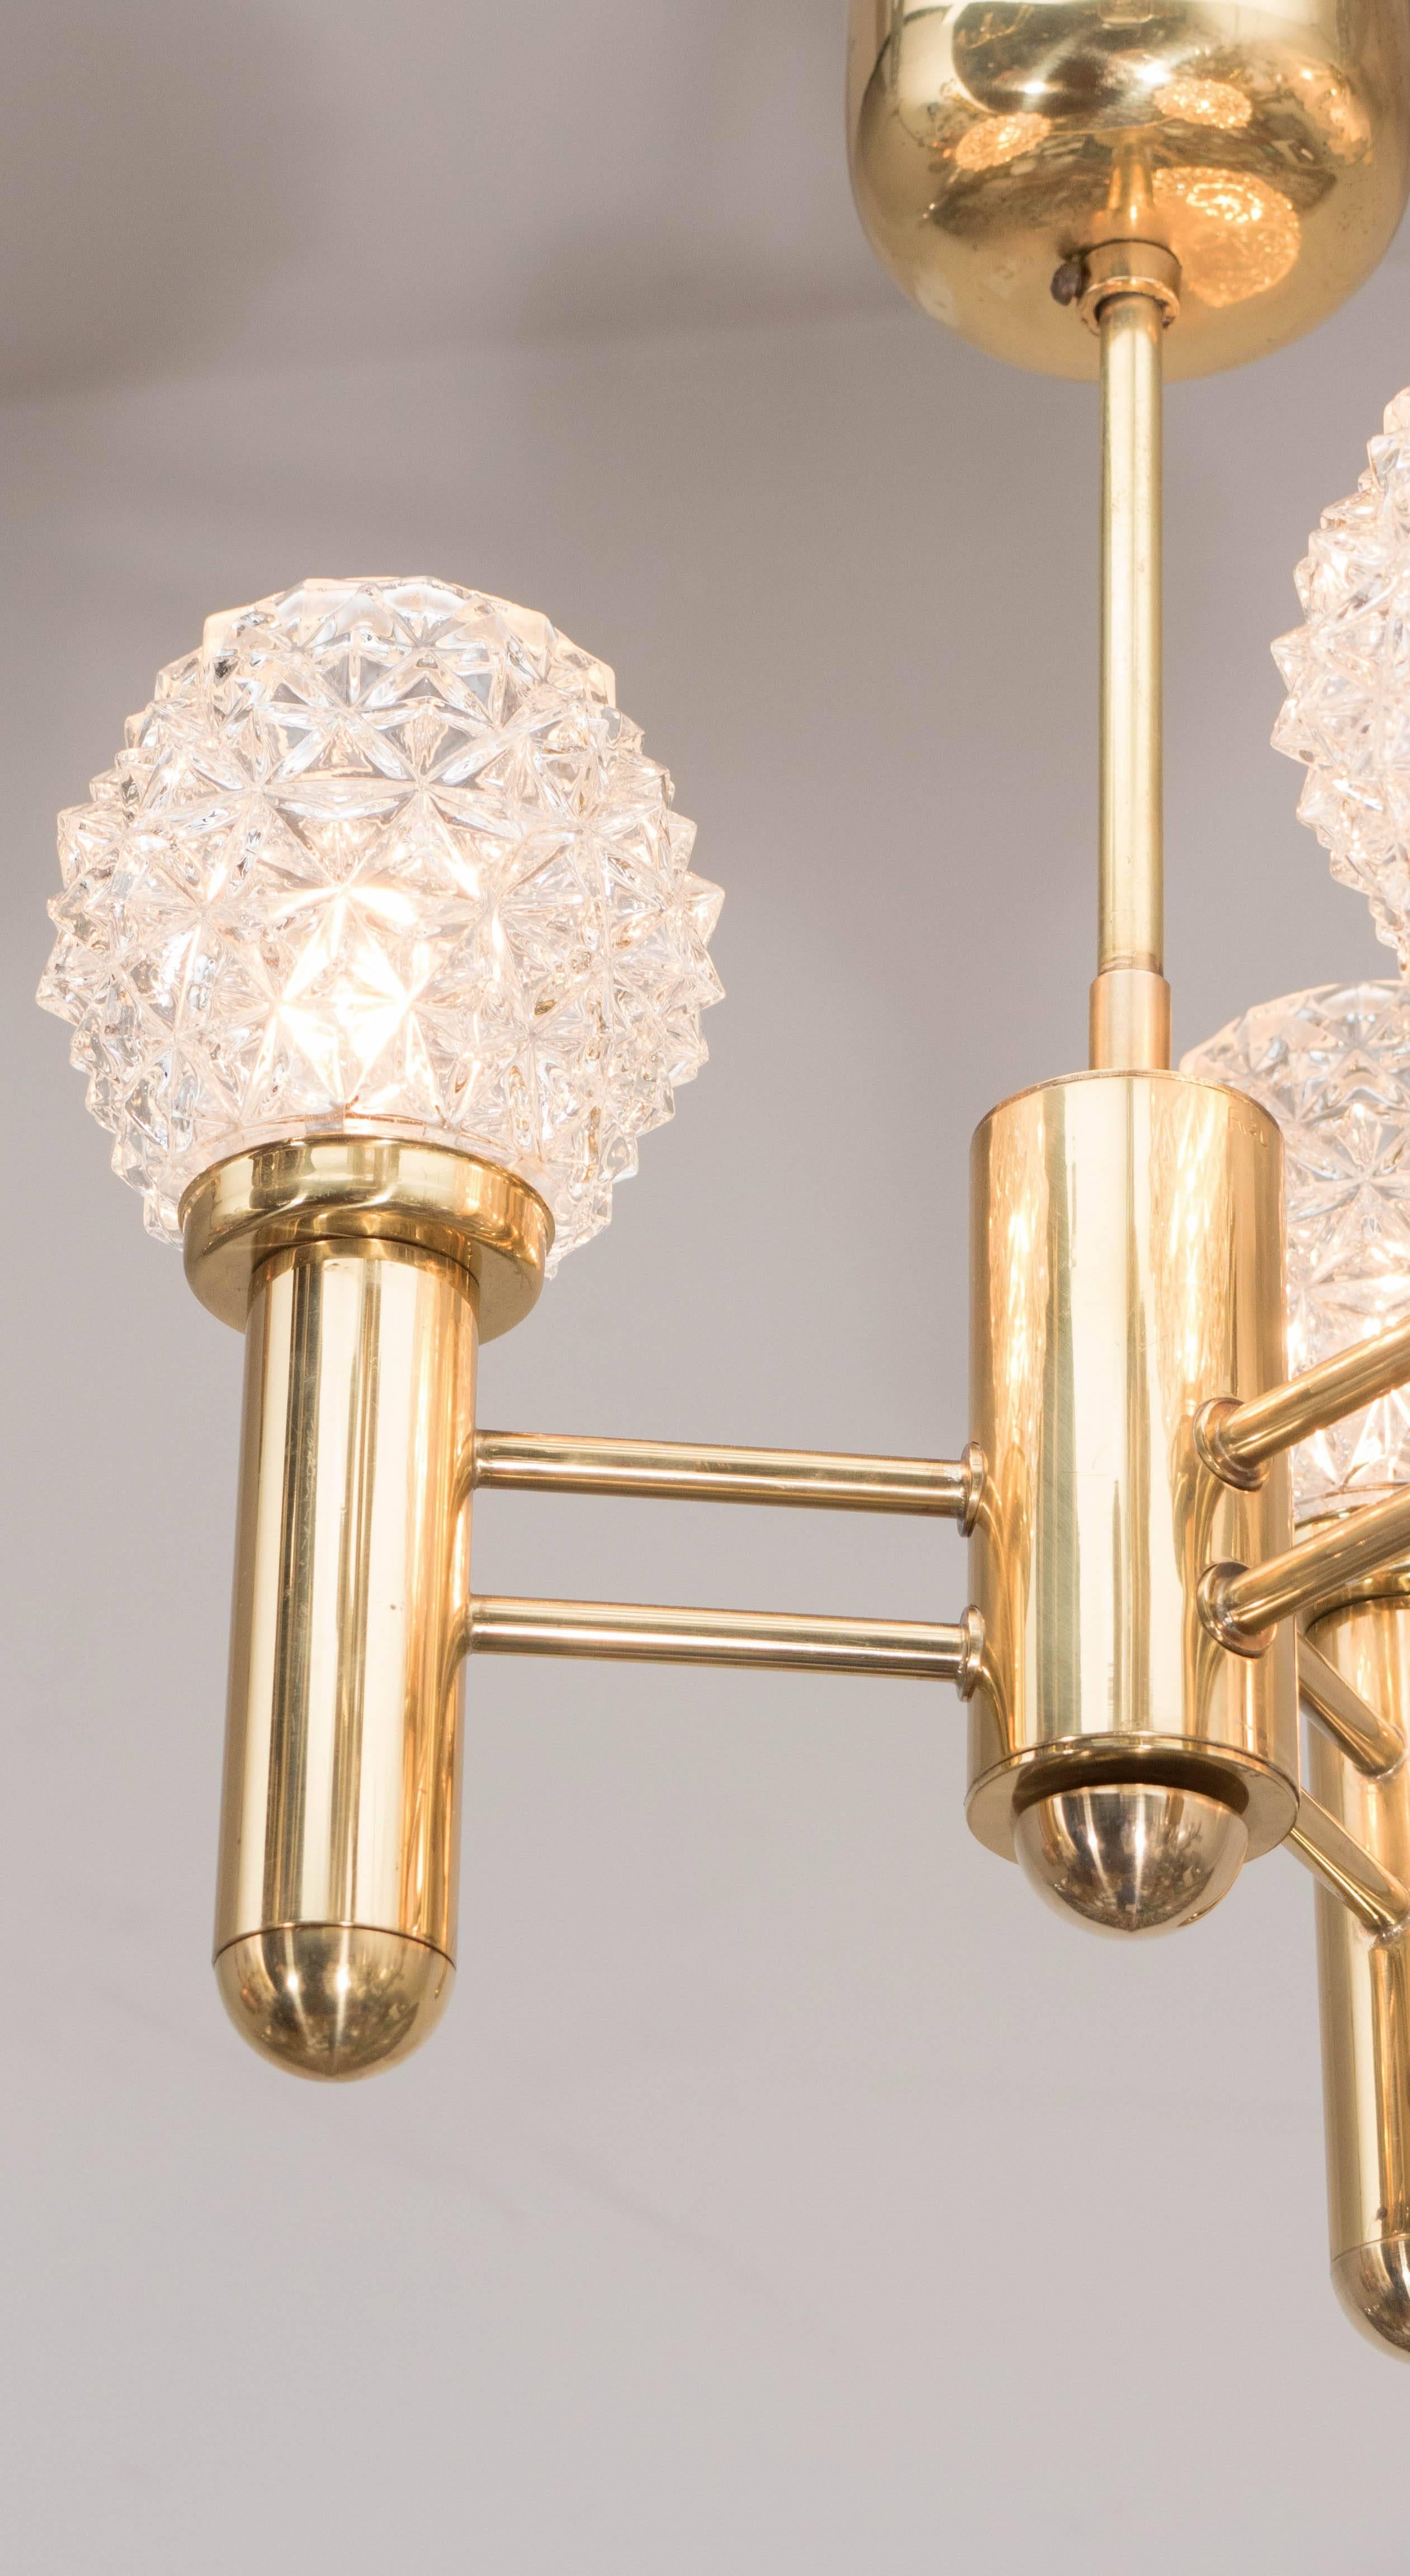 German Chic Mid-Century Modern Three-Arm Brass Chandelier with Faceted Glass Globes